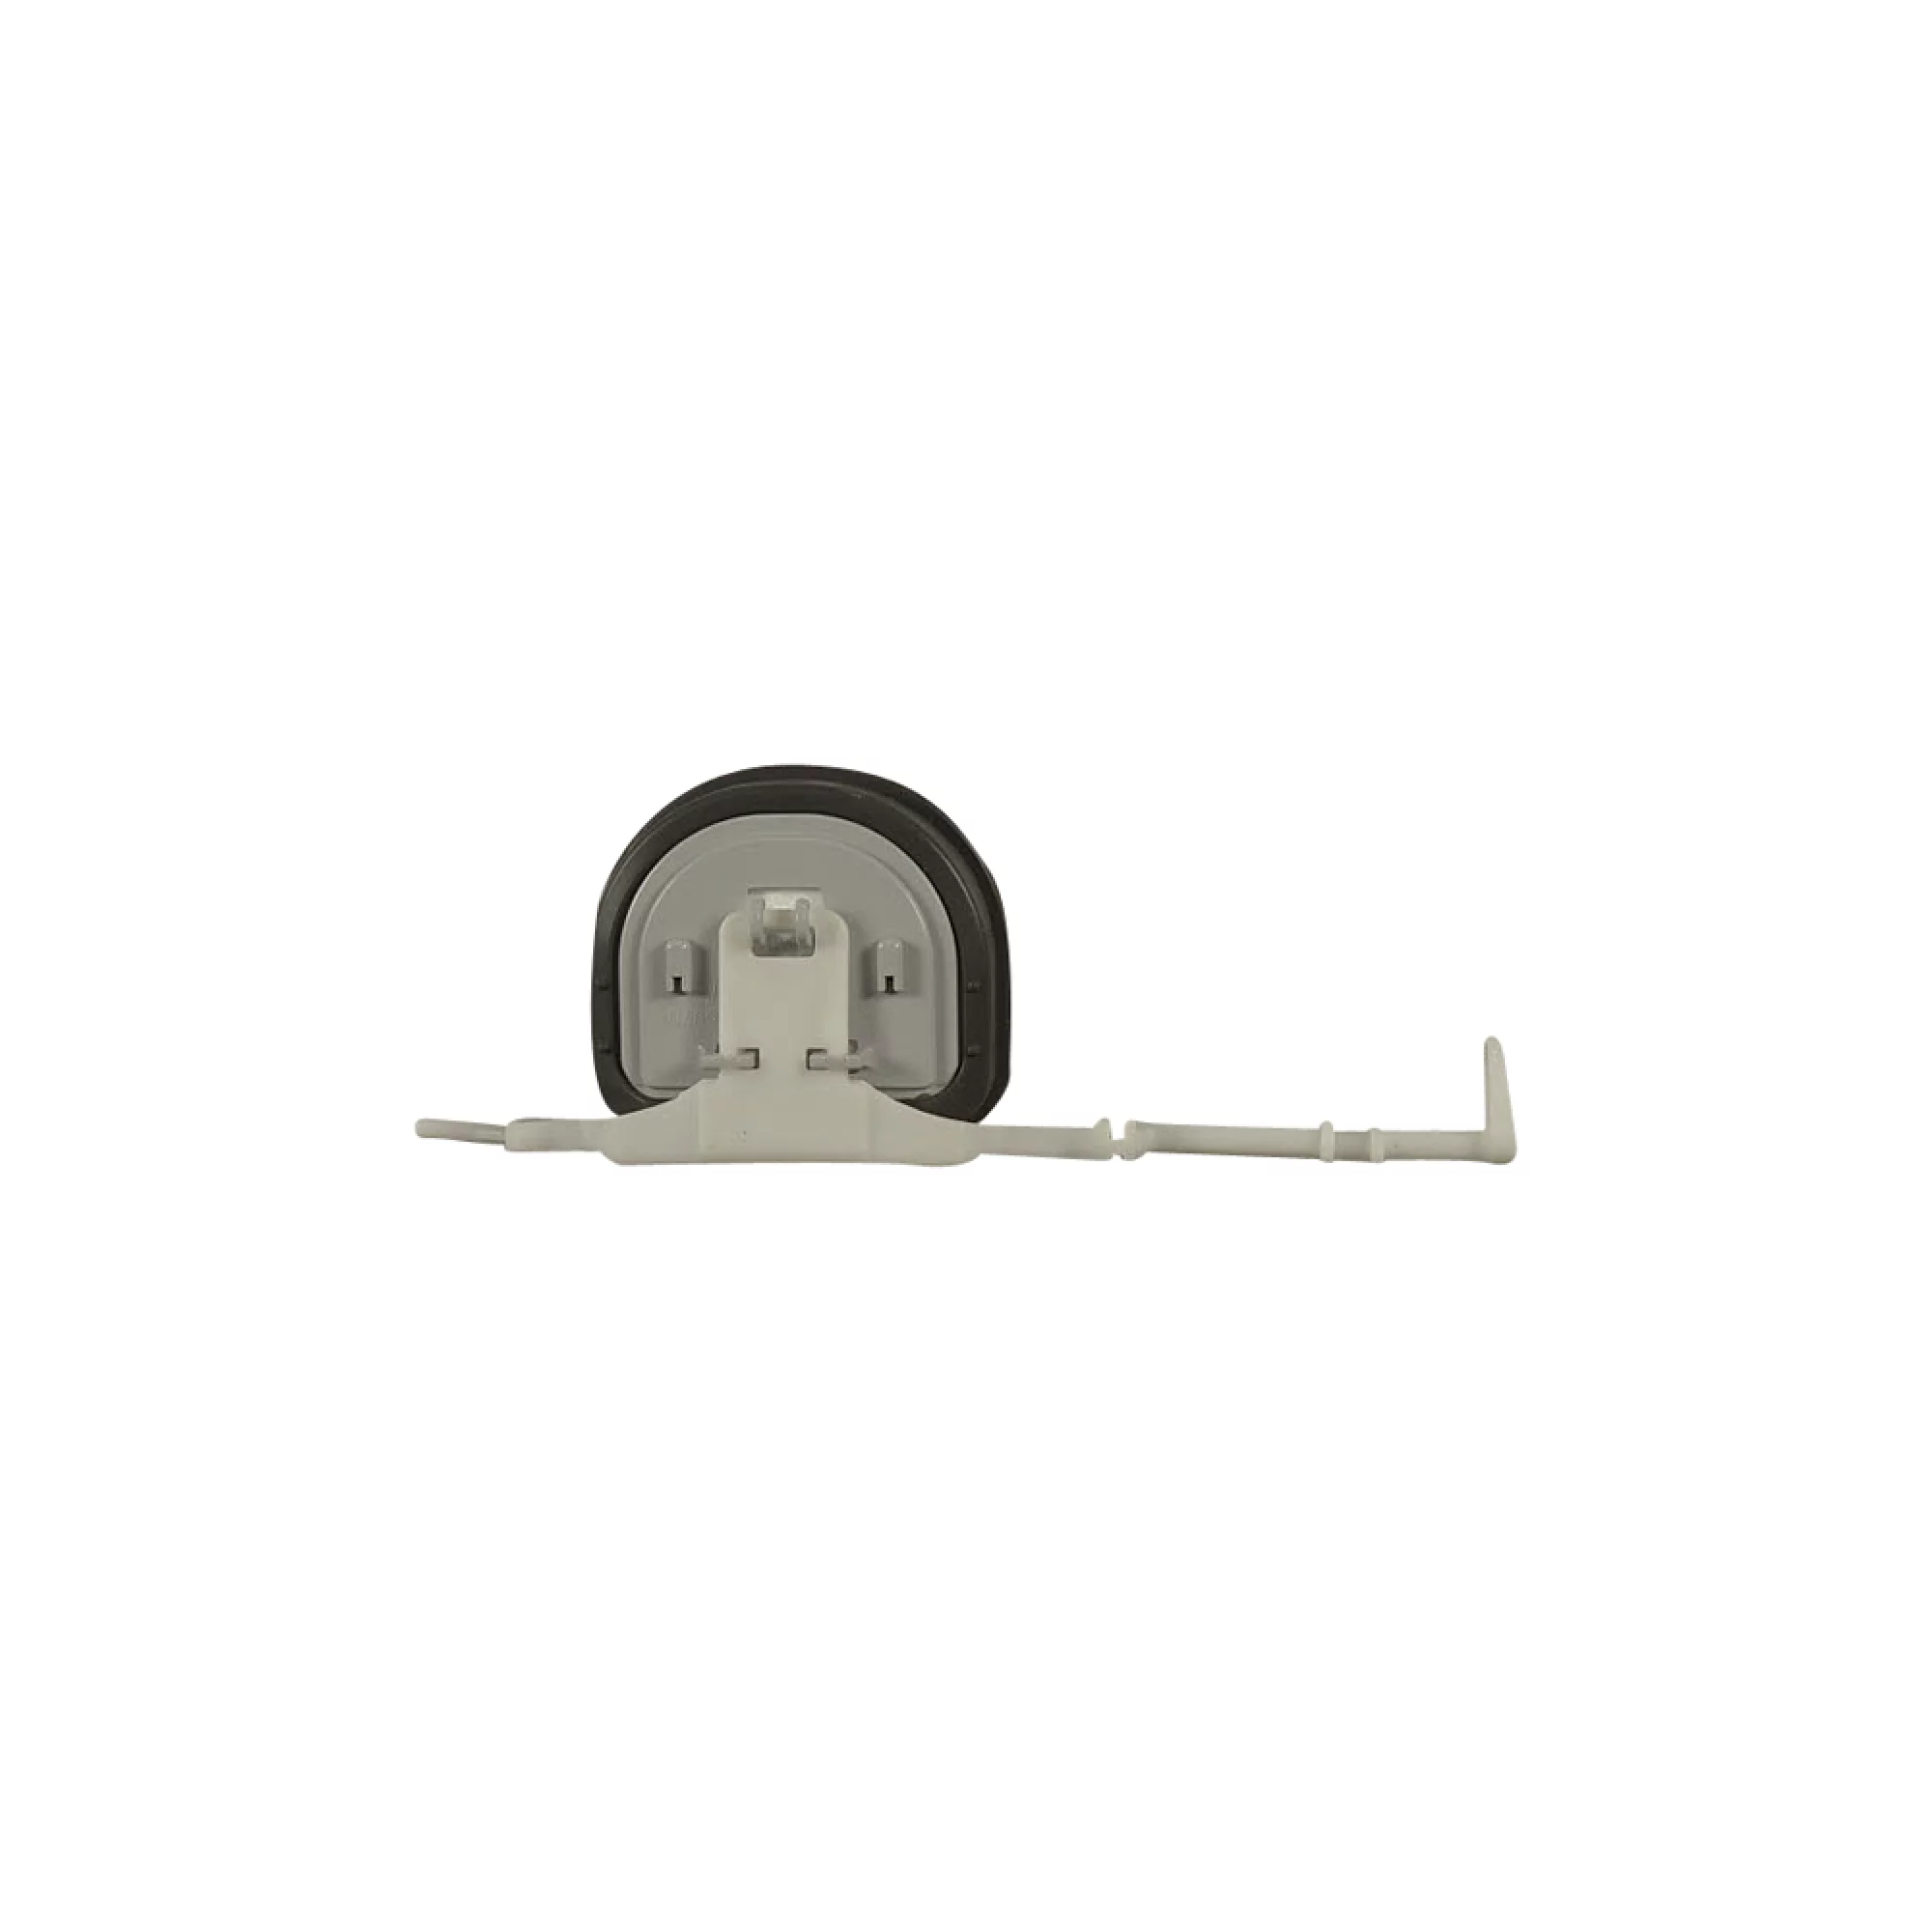 LG Refrigerator Duct Cap Assembly. Part #ABN72938901